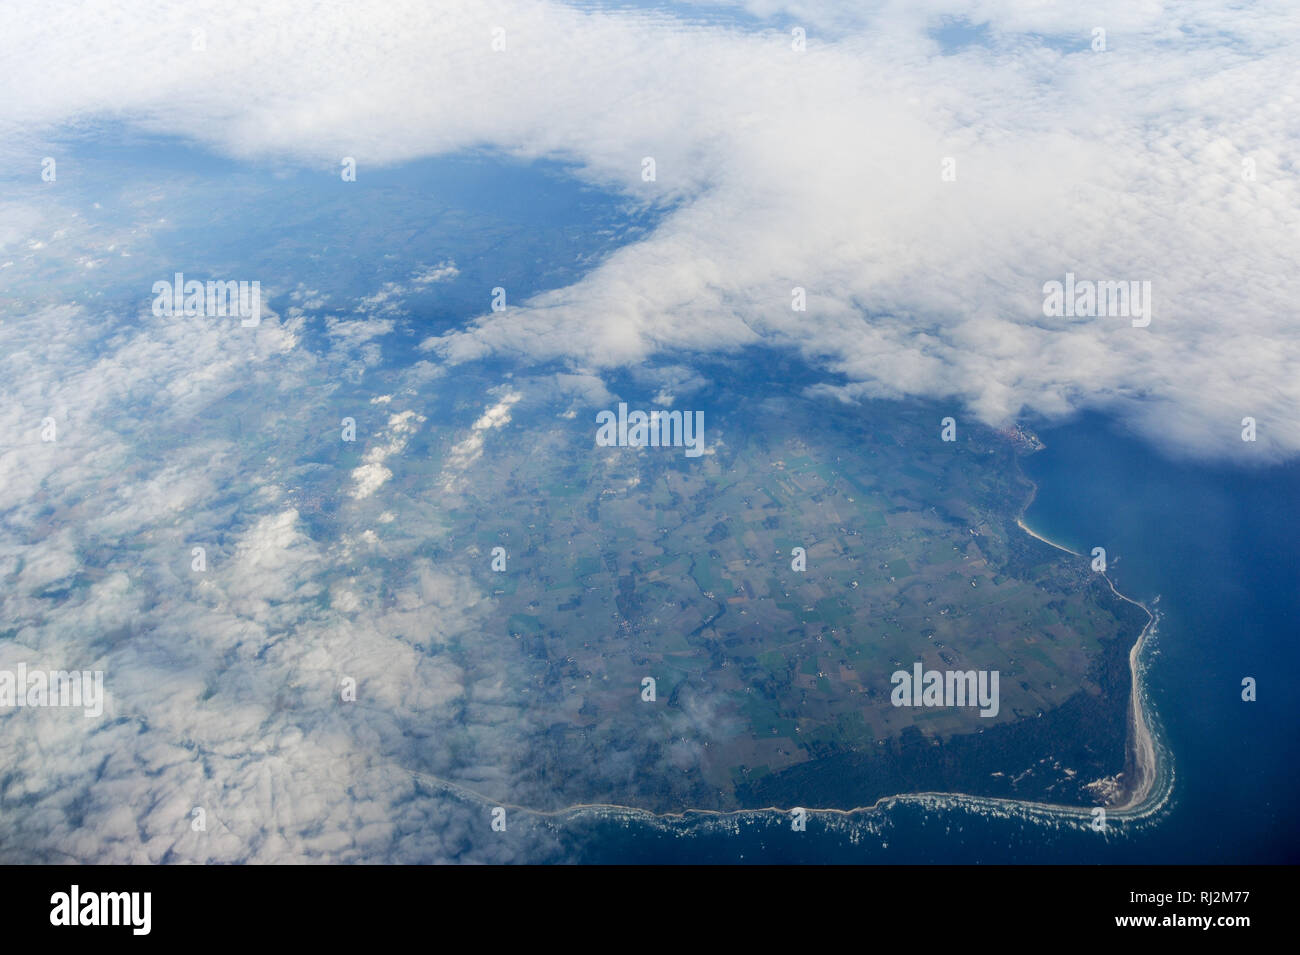 Great Britain from above. October 24th 2008 © Wojciech Strozyk / Alamy Stock Photo Stock Photo